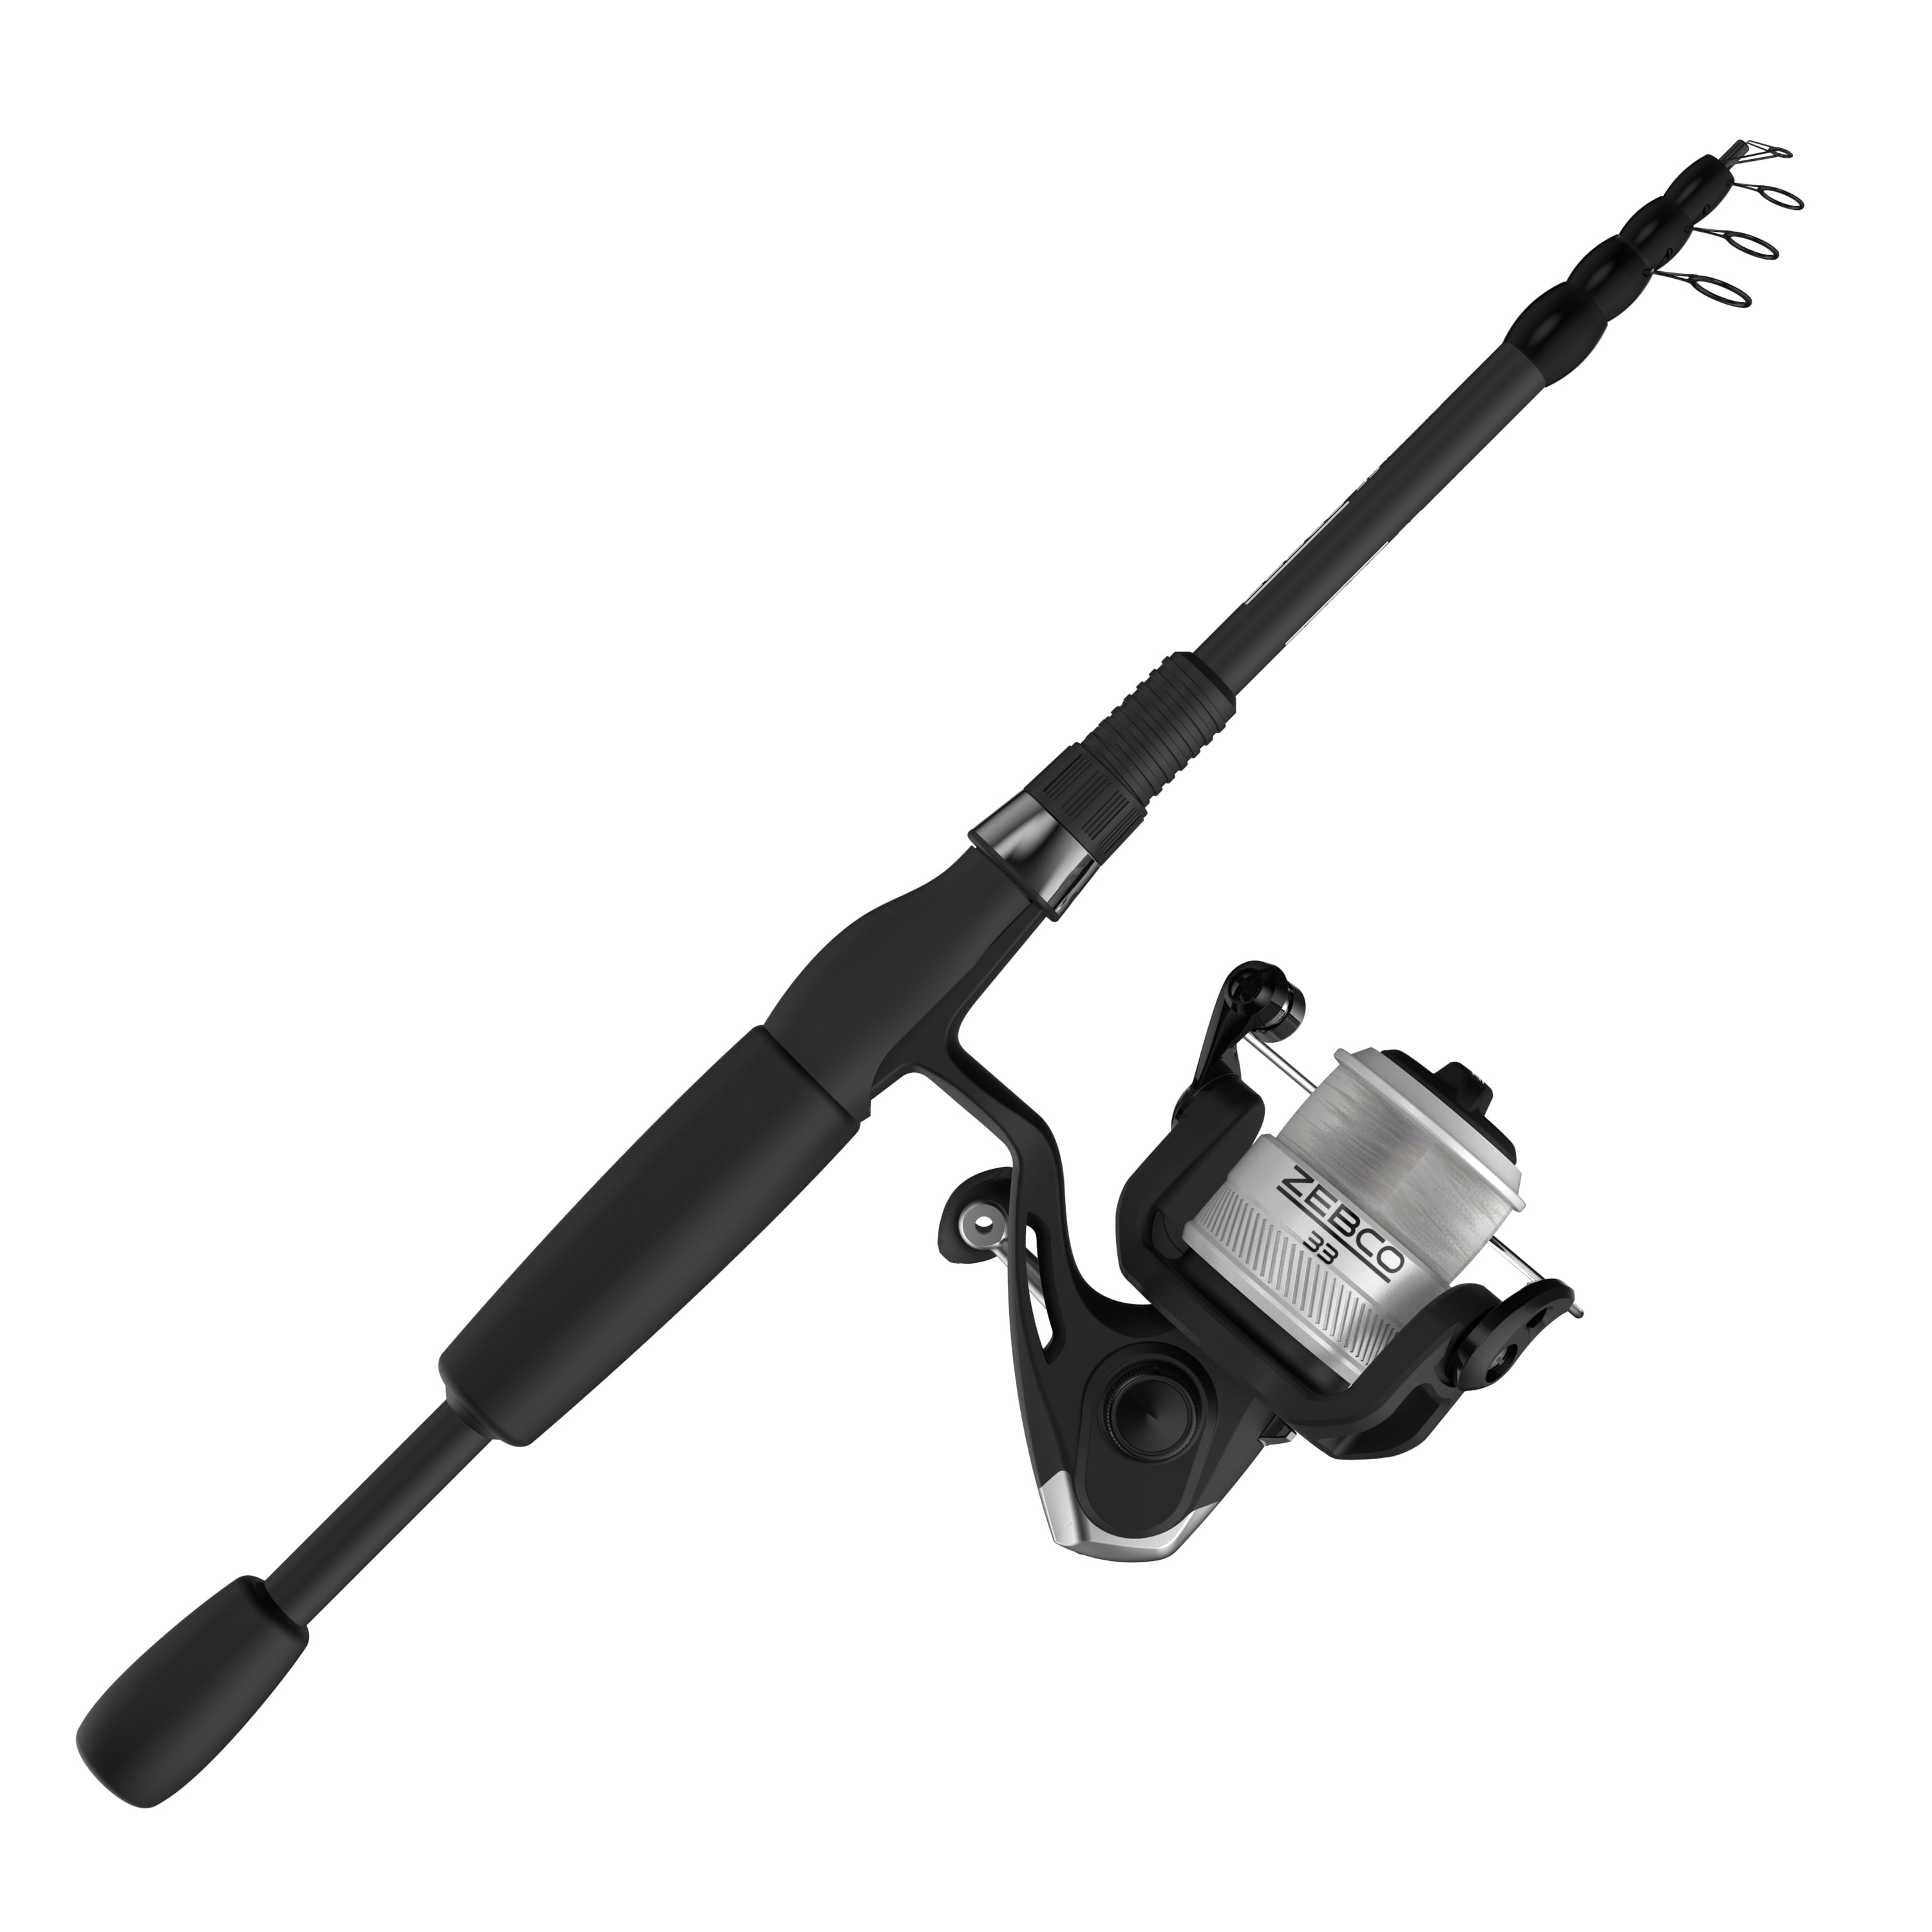 Zebco 33 Spinning Reel and Telescopic Fishing Rod Combo, 6-Foot Rod, Size  30 Reel, Silver/Black